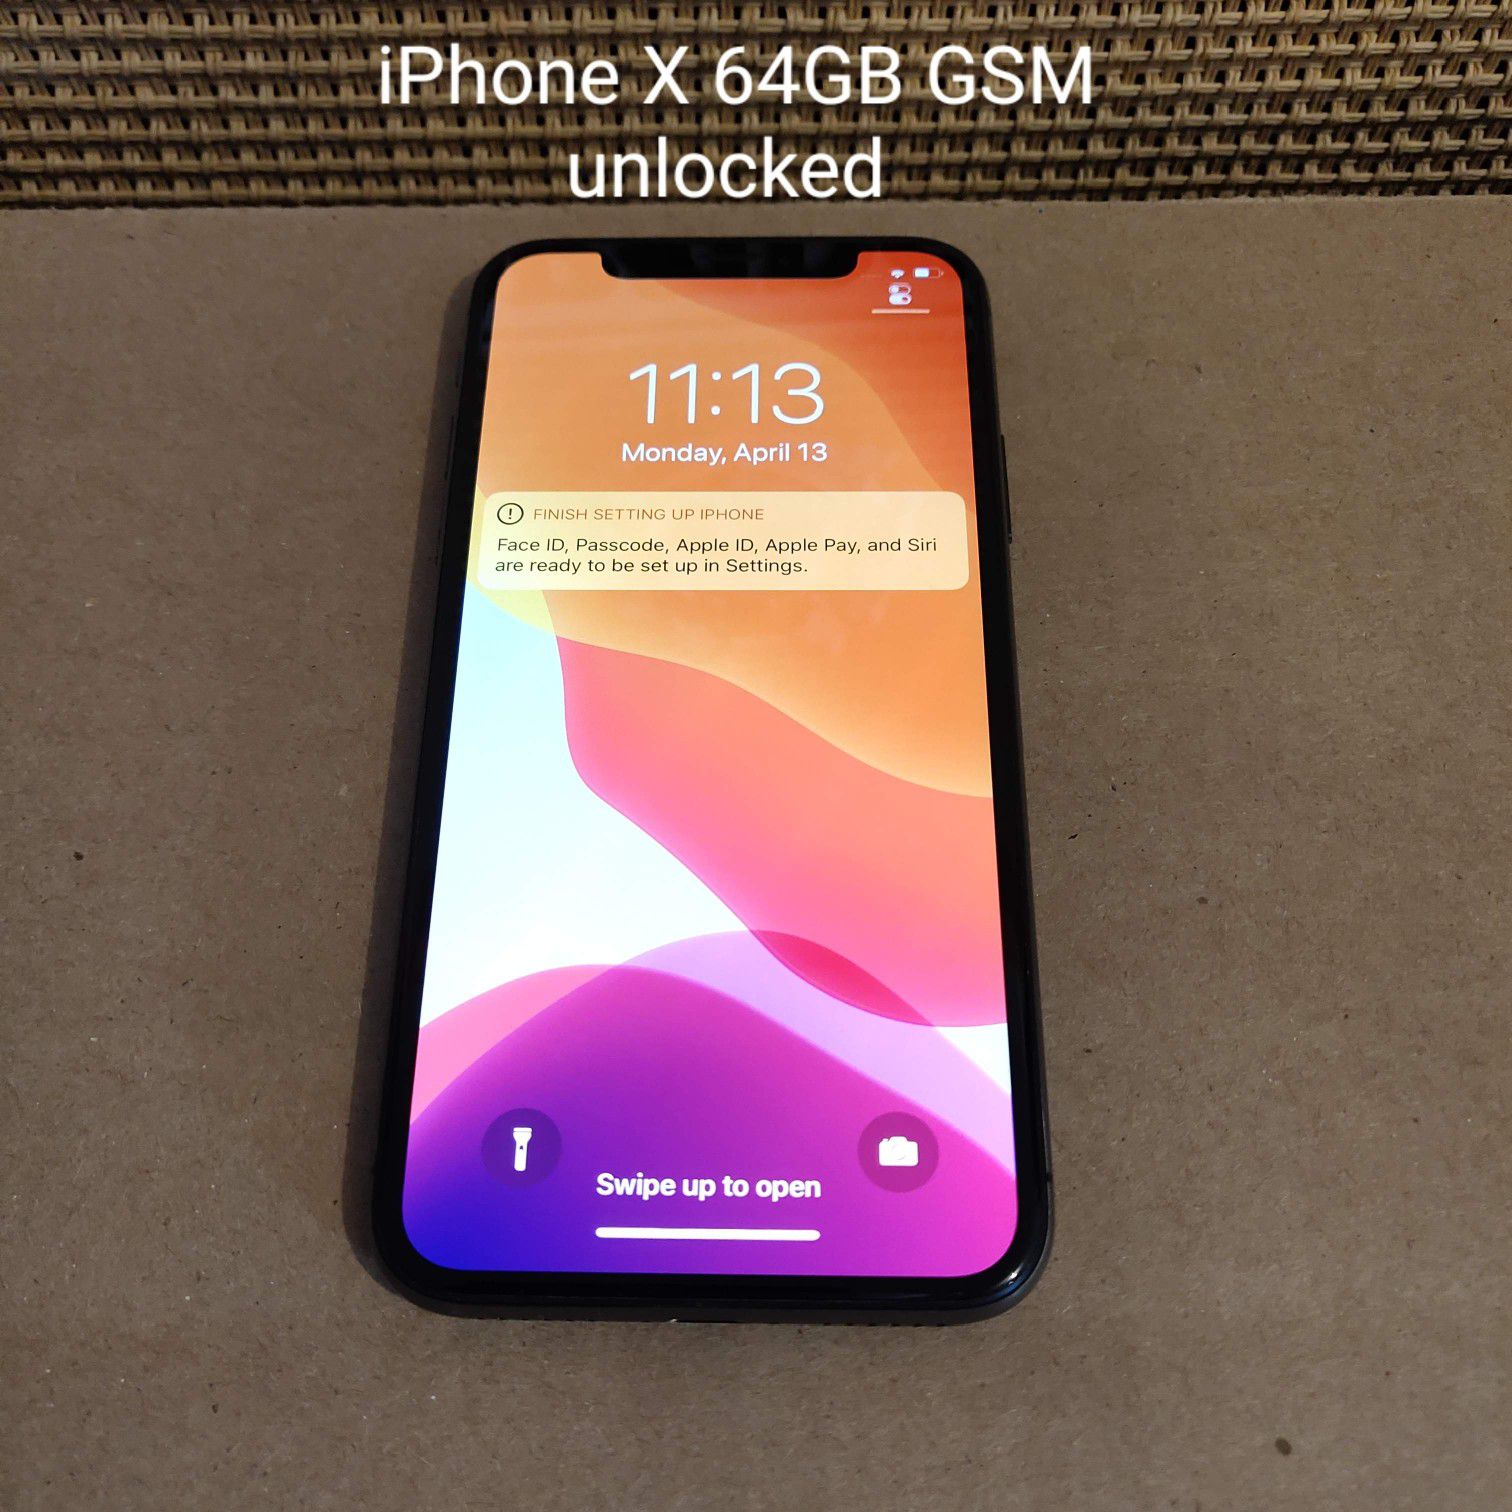 iPhone X 64GB GSM unlocked $649 (will take payments-->)